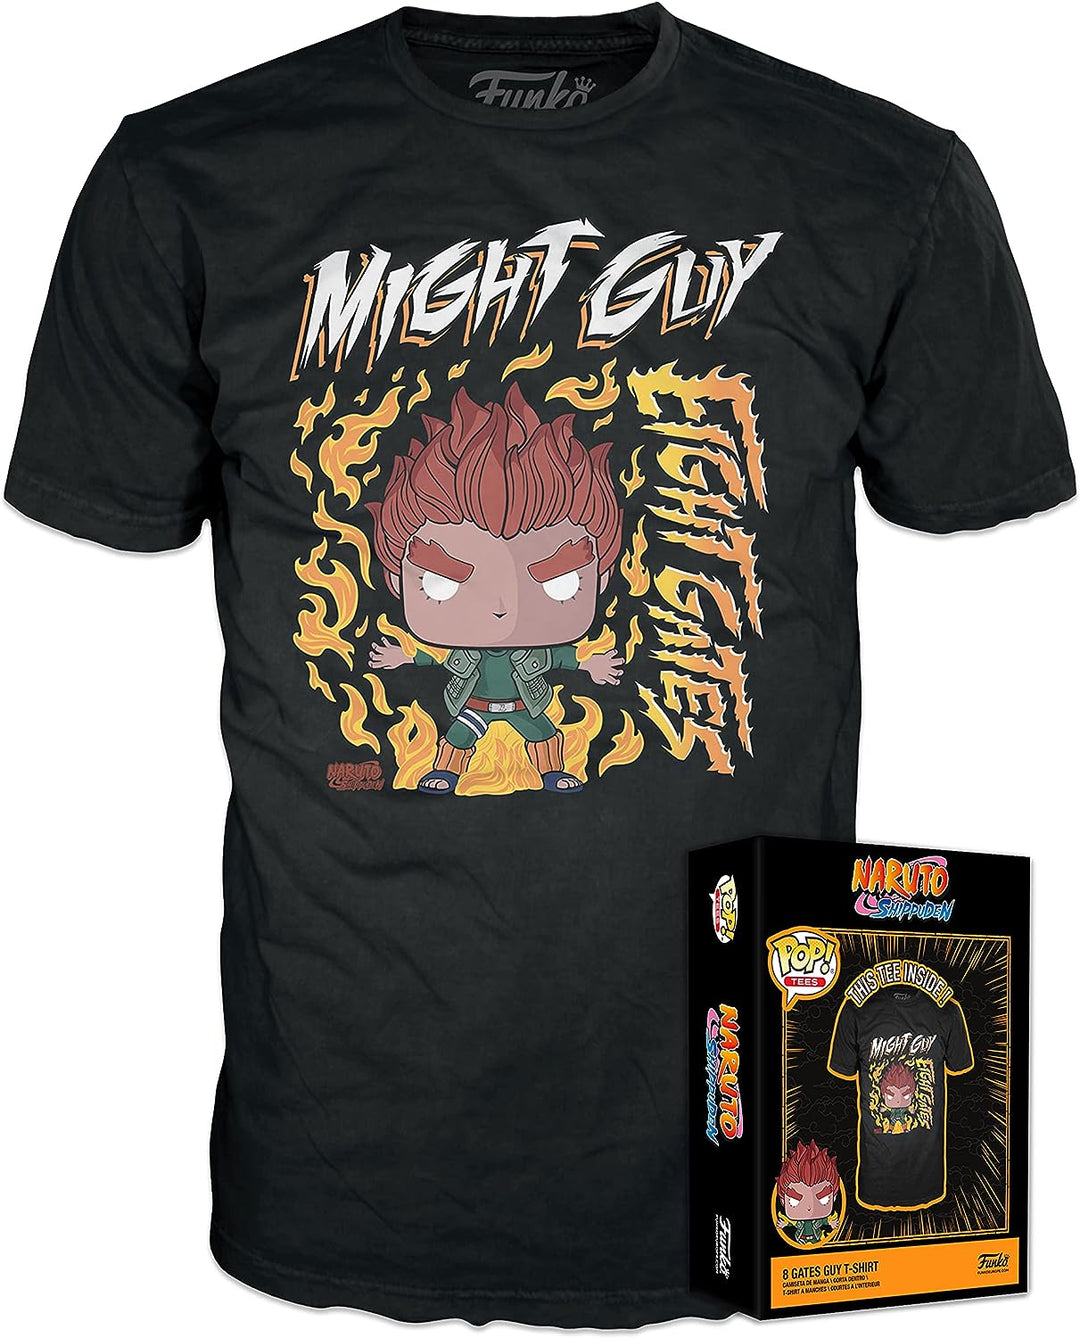 Funko Boxed Tee: Naruto - 8 Gates Guy - Small - (S) - T-Shirt - Clothes - Gift Idea - Short Sleeve Top for Adults Unisex Men and Women